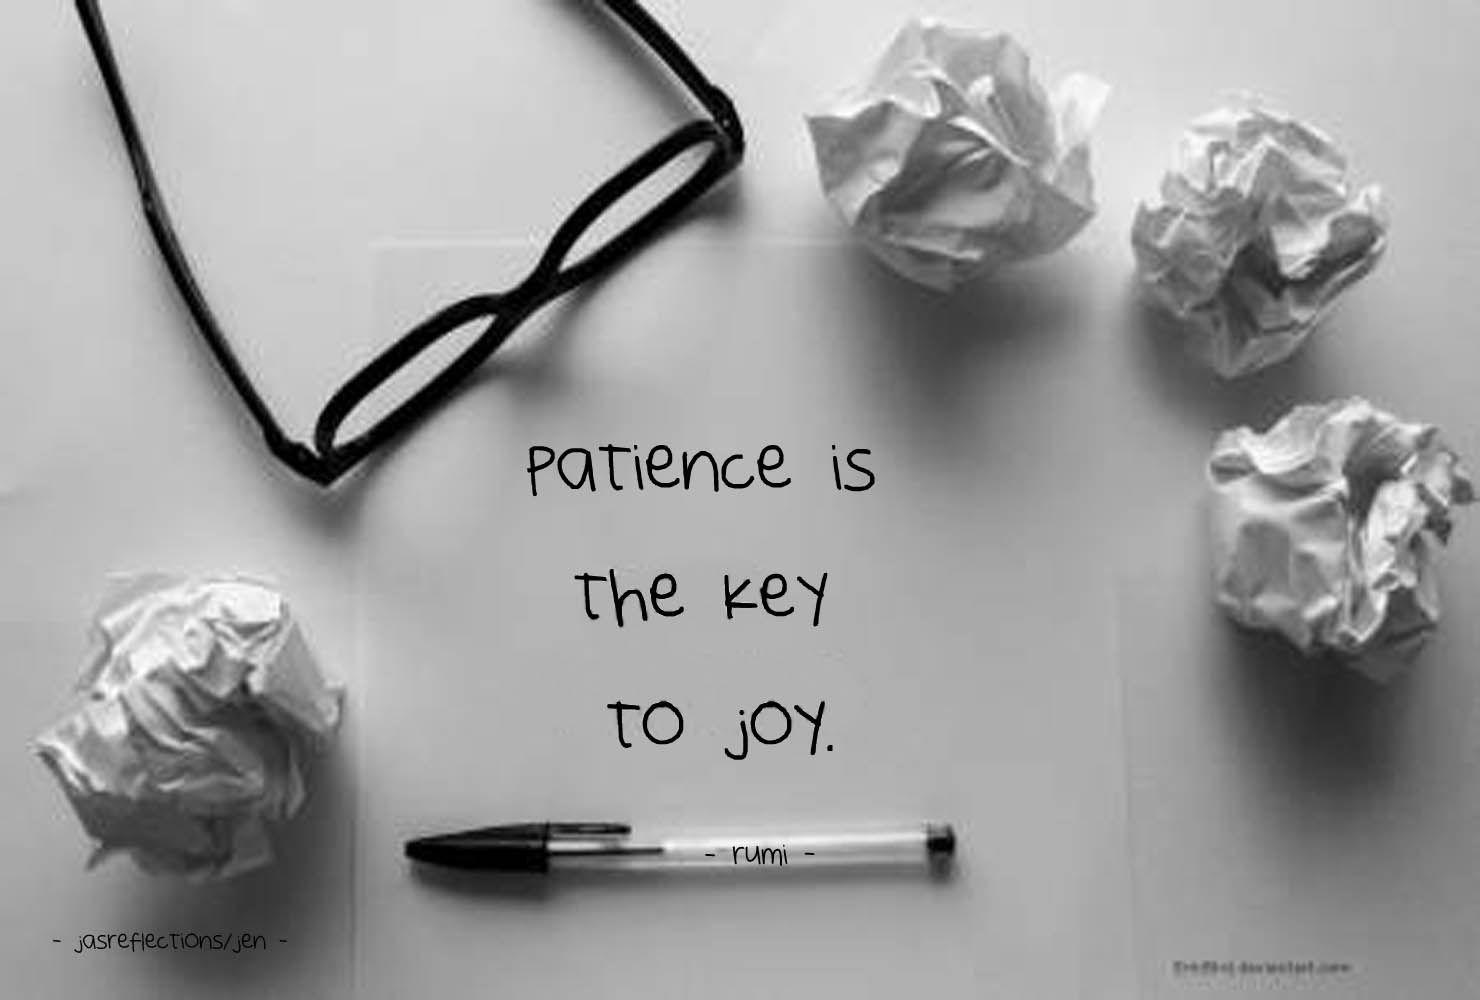 PATIENCE IS THE KEY TO JOY